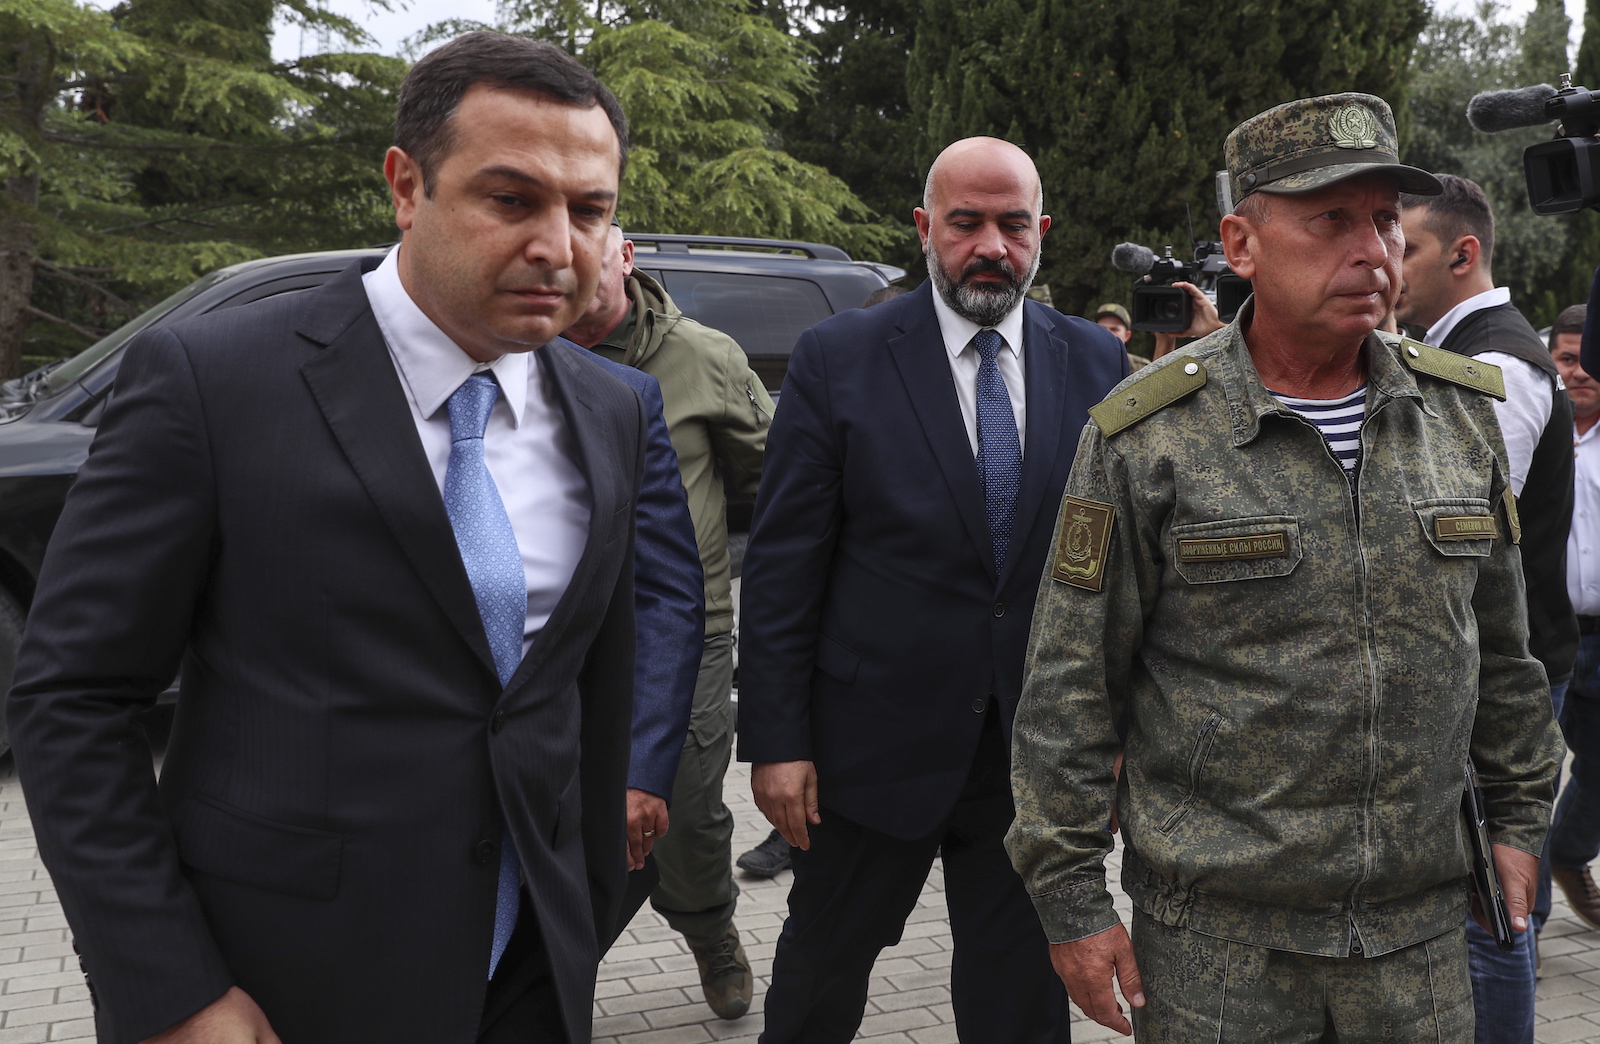 epa10873690 Davit Melkumyan (C), deputy of the National Assembly of the Nagorno-Karabakh arrives for talks with Azerbaijani officials in Yevlakh, Azerbaijan, 21 September 2023. Representatives of Armenian residents in the Karabakh region and Azerbaijani authorities held a meeting in Yevlakh at the invitation of Azerbaijan's Presidential Administration to discuss reintegration issues based on the Azeri Constitution and its laws, Azerbaijan state media said. The meeting follows Azerbaijan government's announcement that a ceasefire was agreed with separatists in Nagorno-Karabakh on 20 September, after a 24-hour military offensive to take control of the enclave.  EPA/ROMAN ISMAYILOV